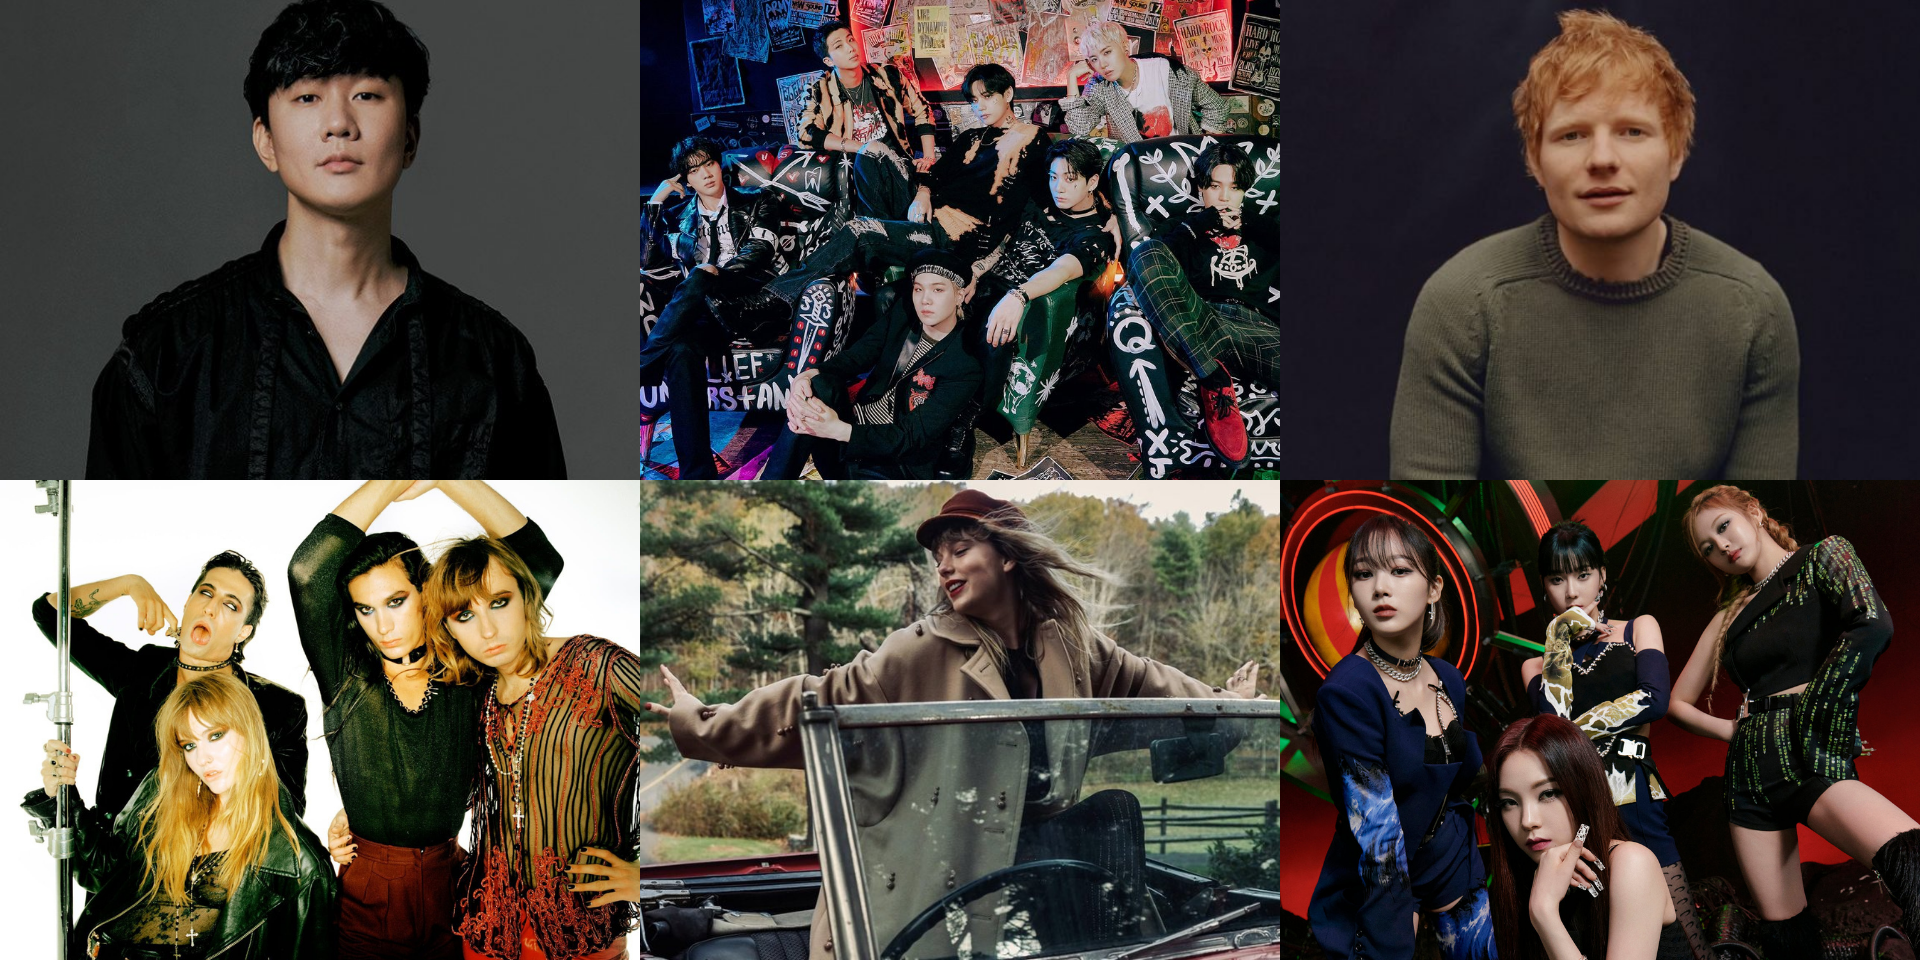 Here are the winners of the 2021 MTV EMA – BTS, Taylor Swift, JJ Lin, Ed Sheeran, Måneskin, aespa, and more